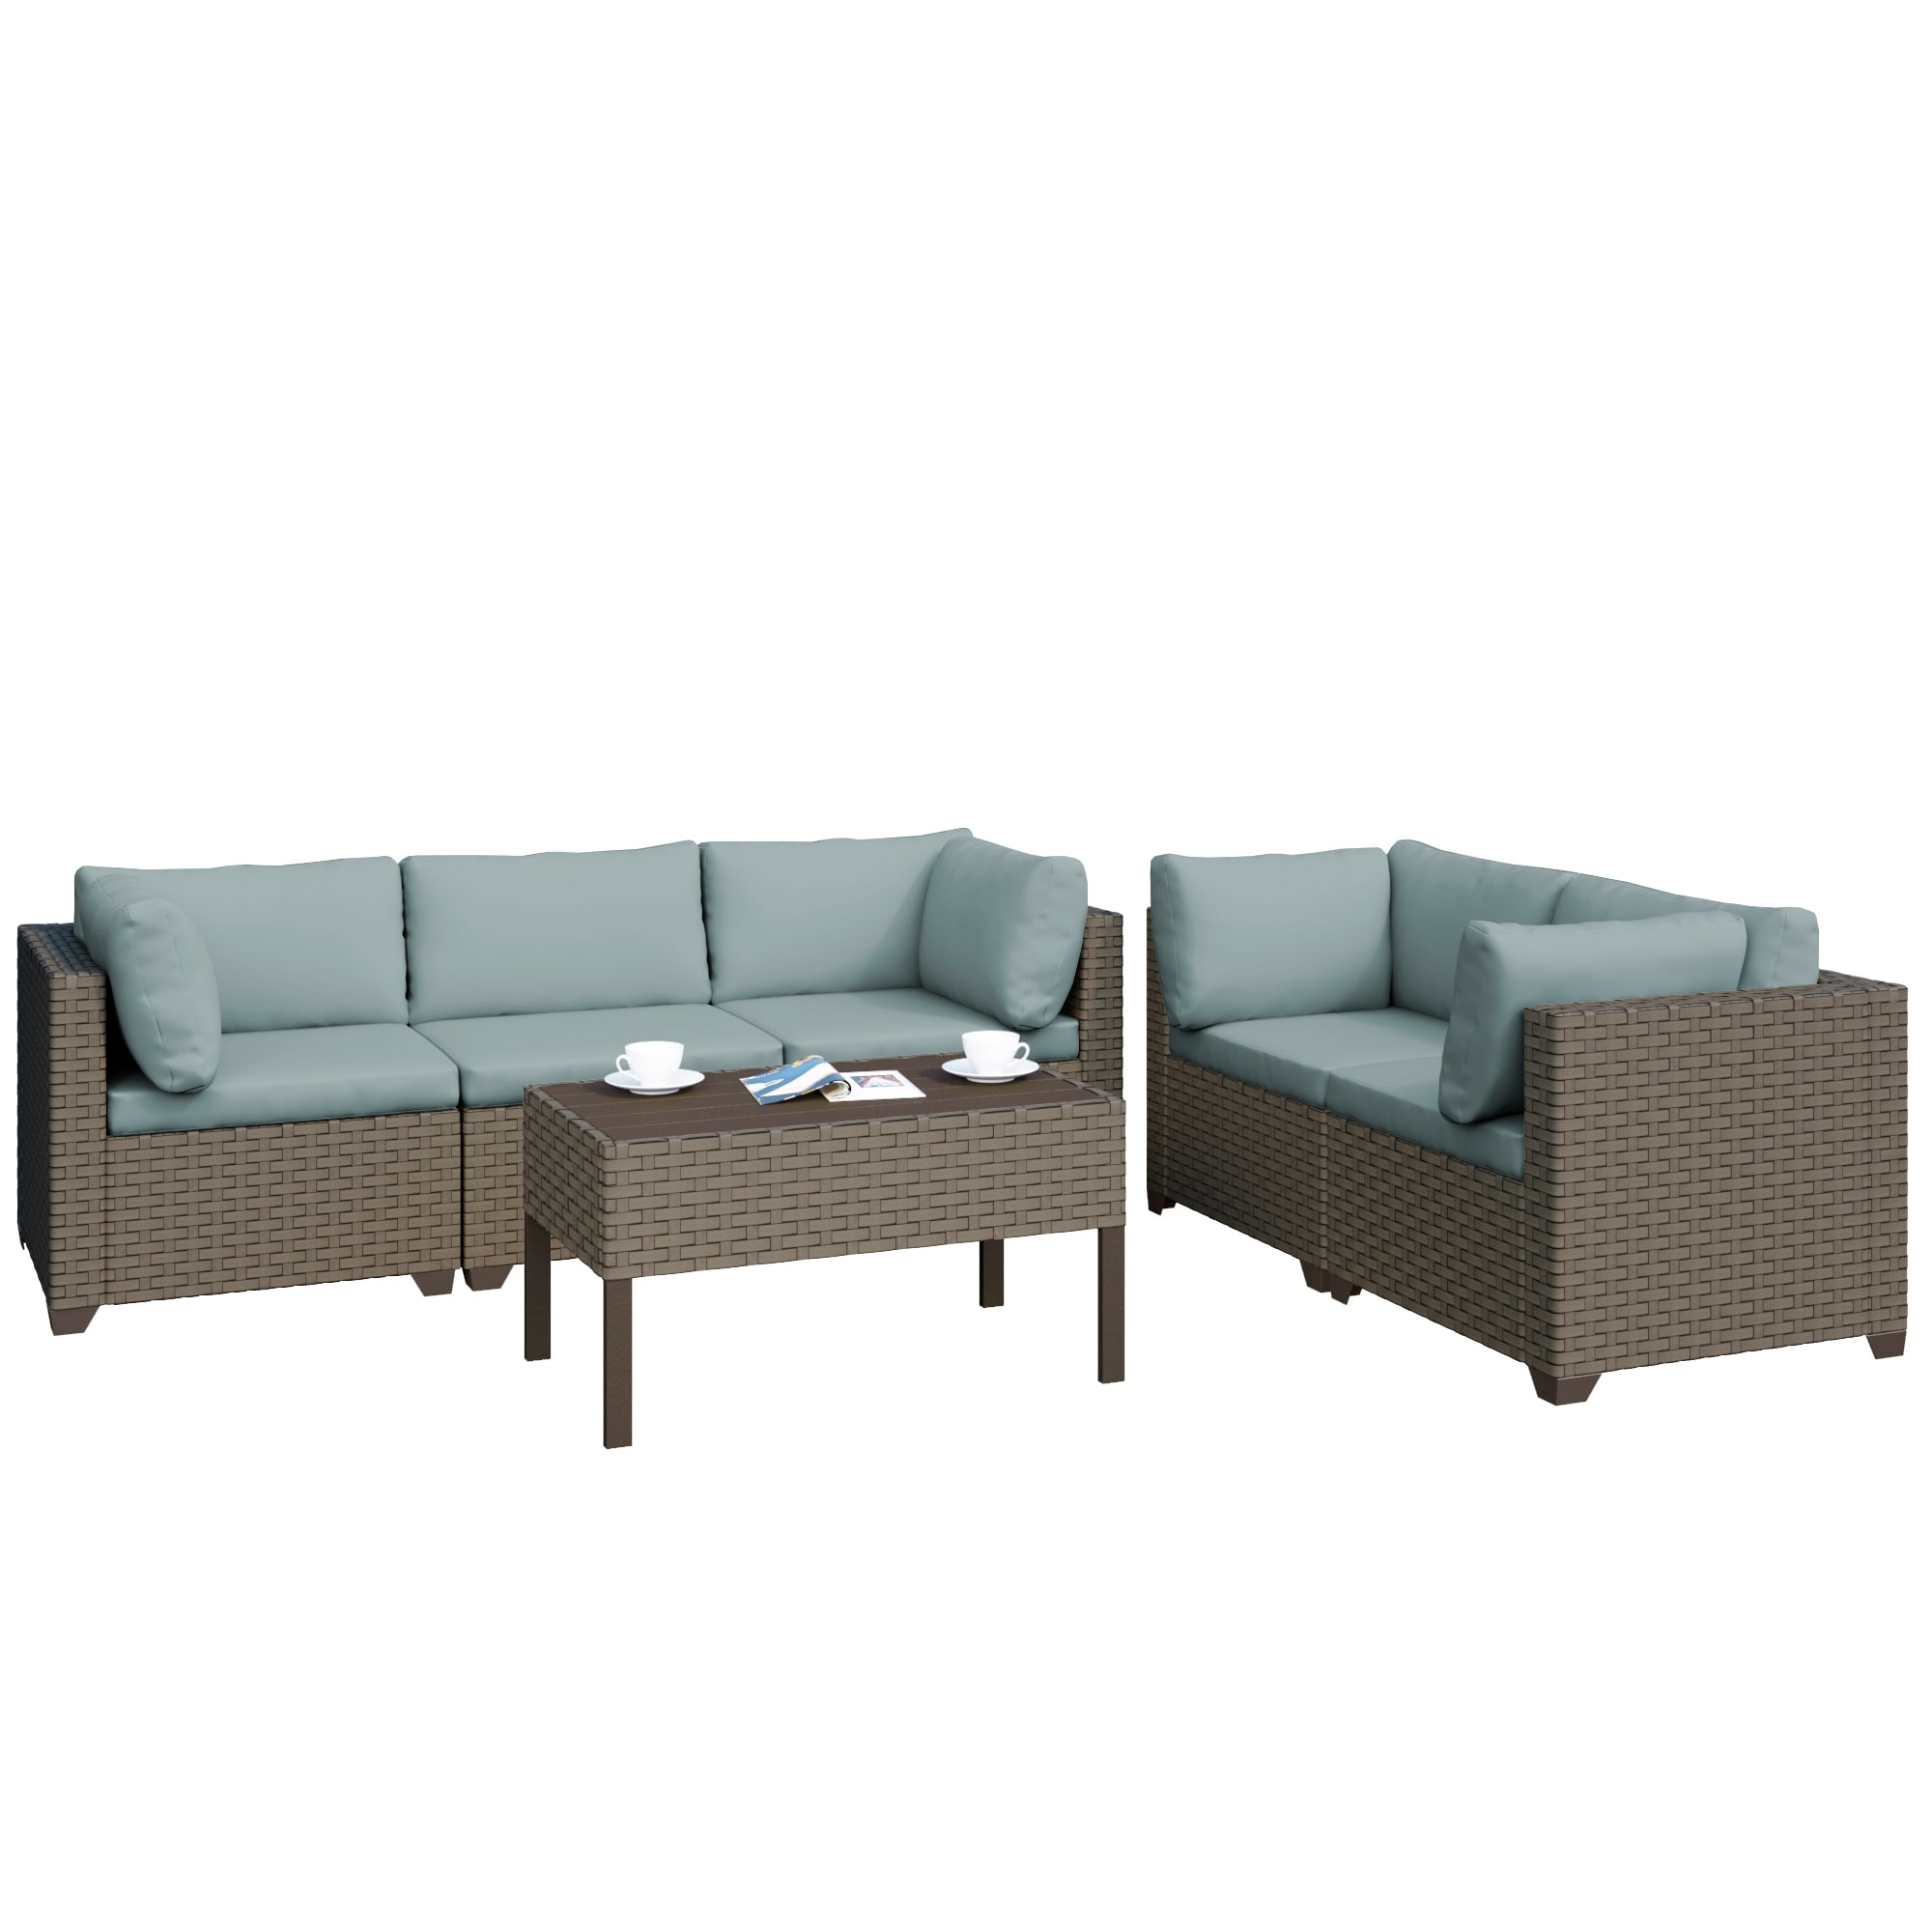 Keys 6-piece Outdoor Conversation Set With Loveseat  Sofa  And Coffee Table In Summer Fog Wicker